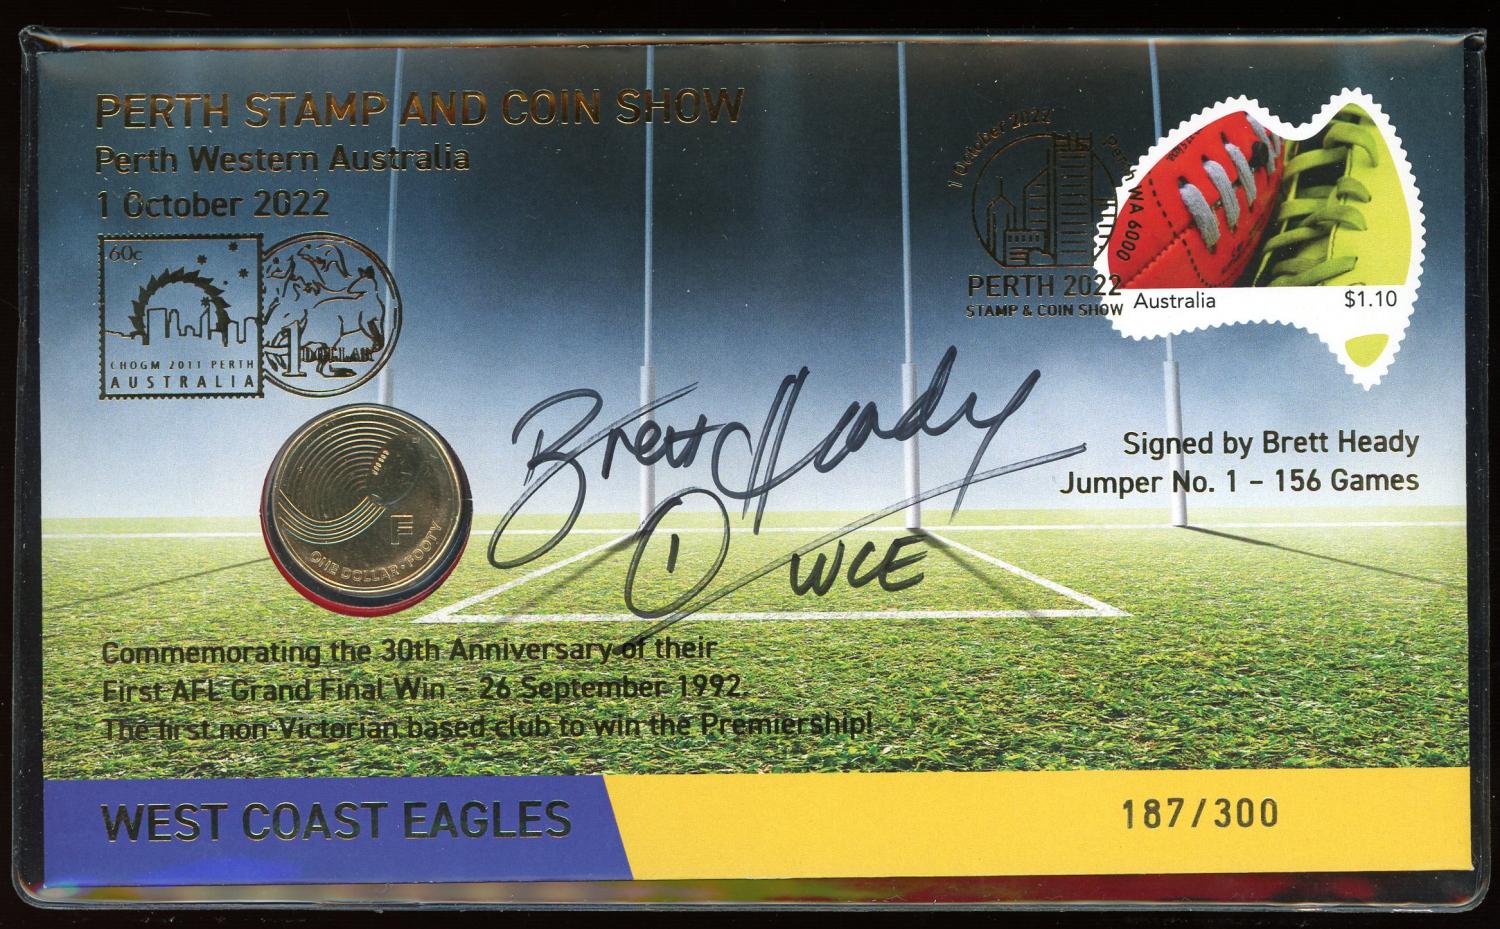 Thumbnail for 2022 West Coast Eagles PNC Signed by Brett Heady - Perth Stamp and Coin Show Limited to only 300